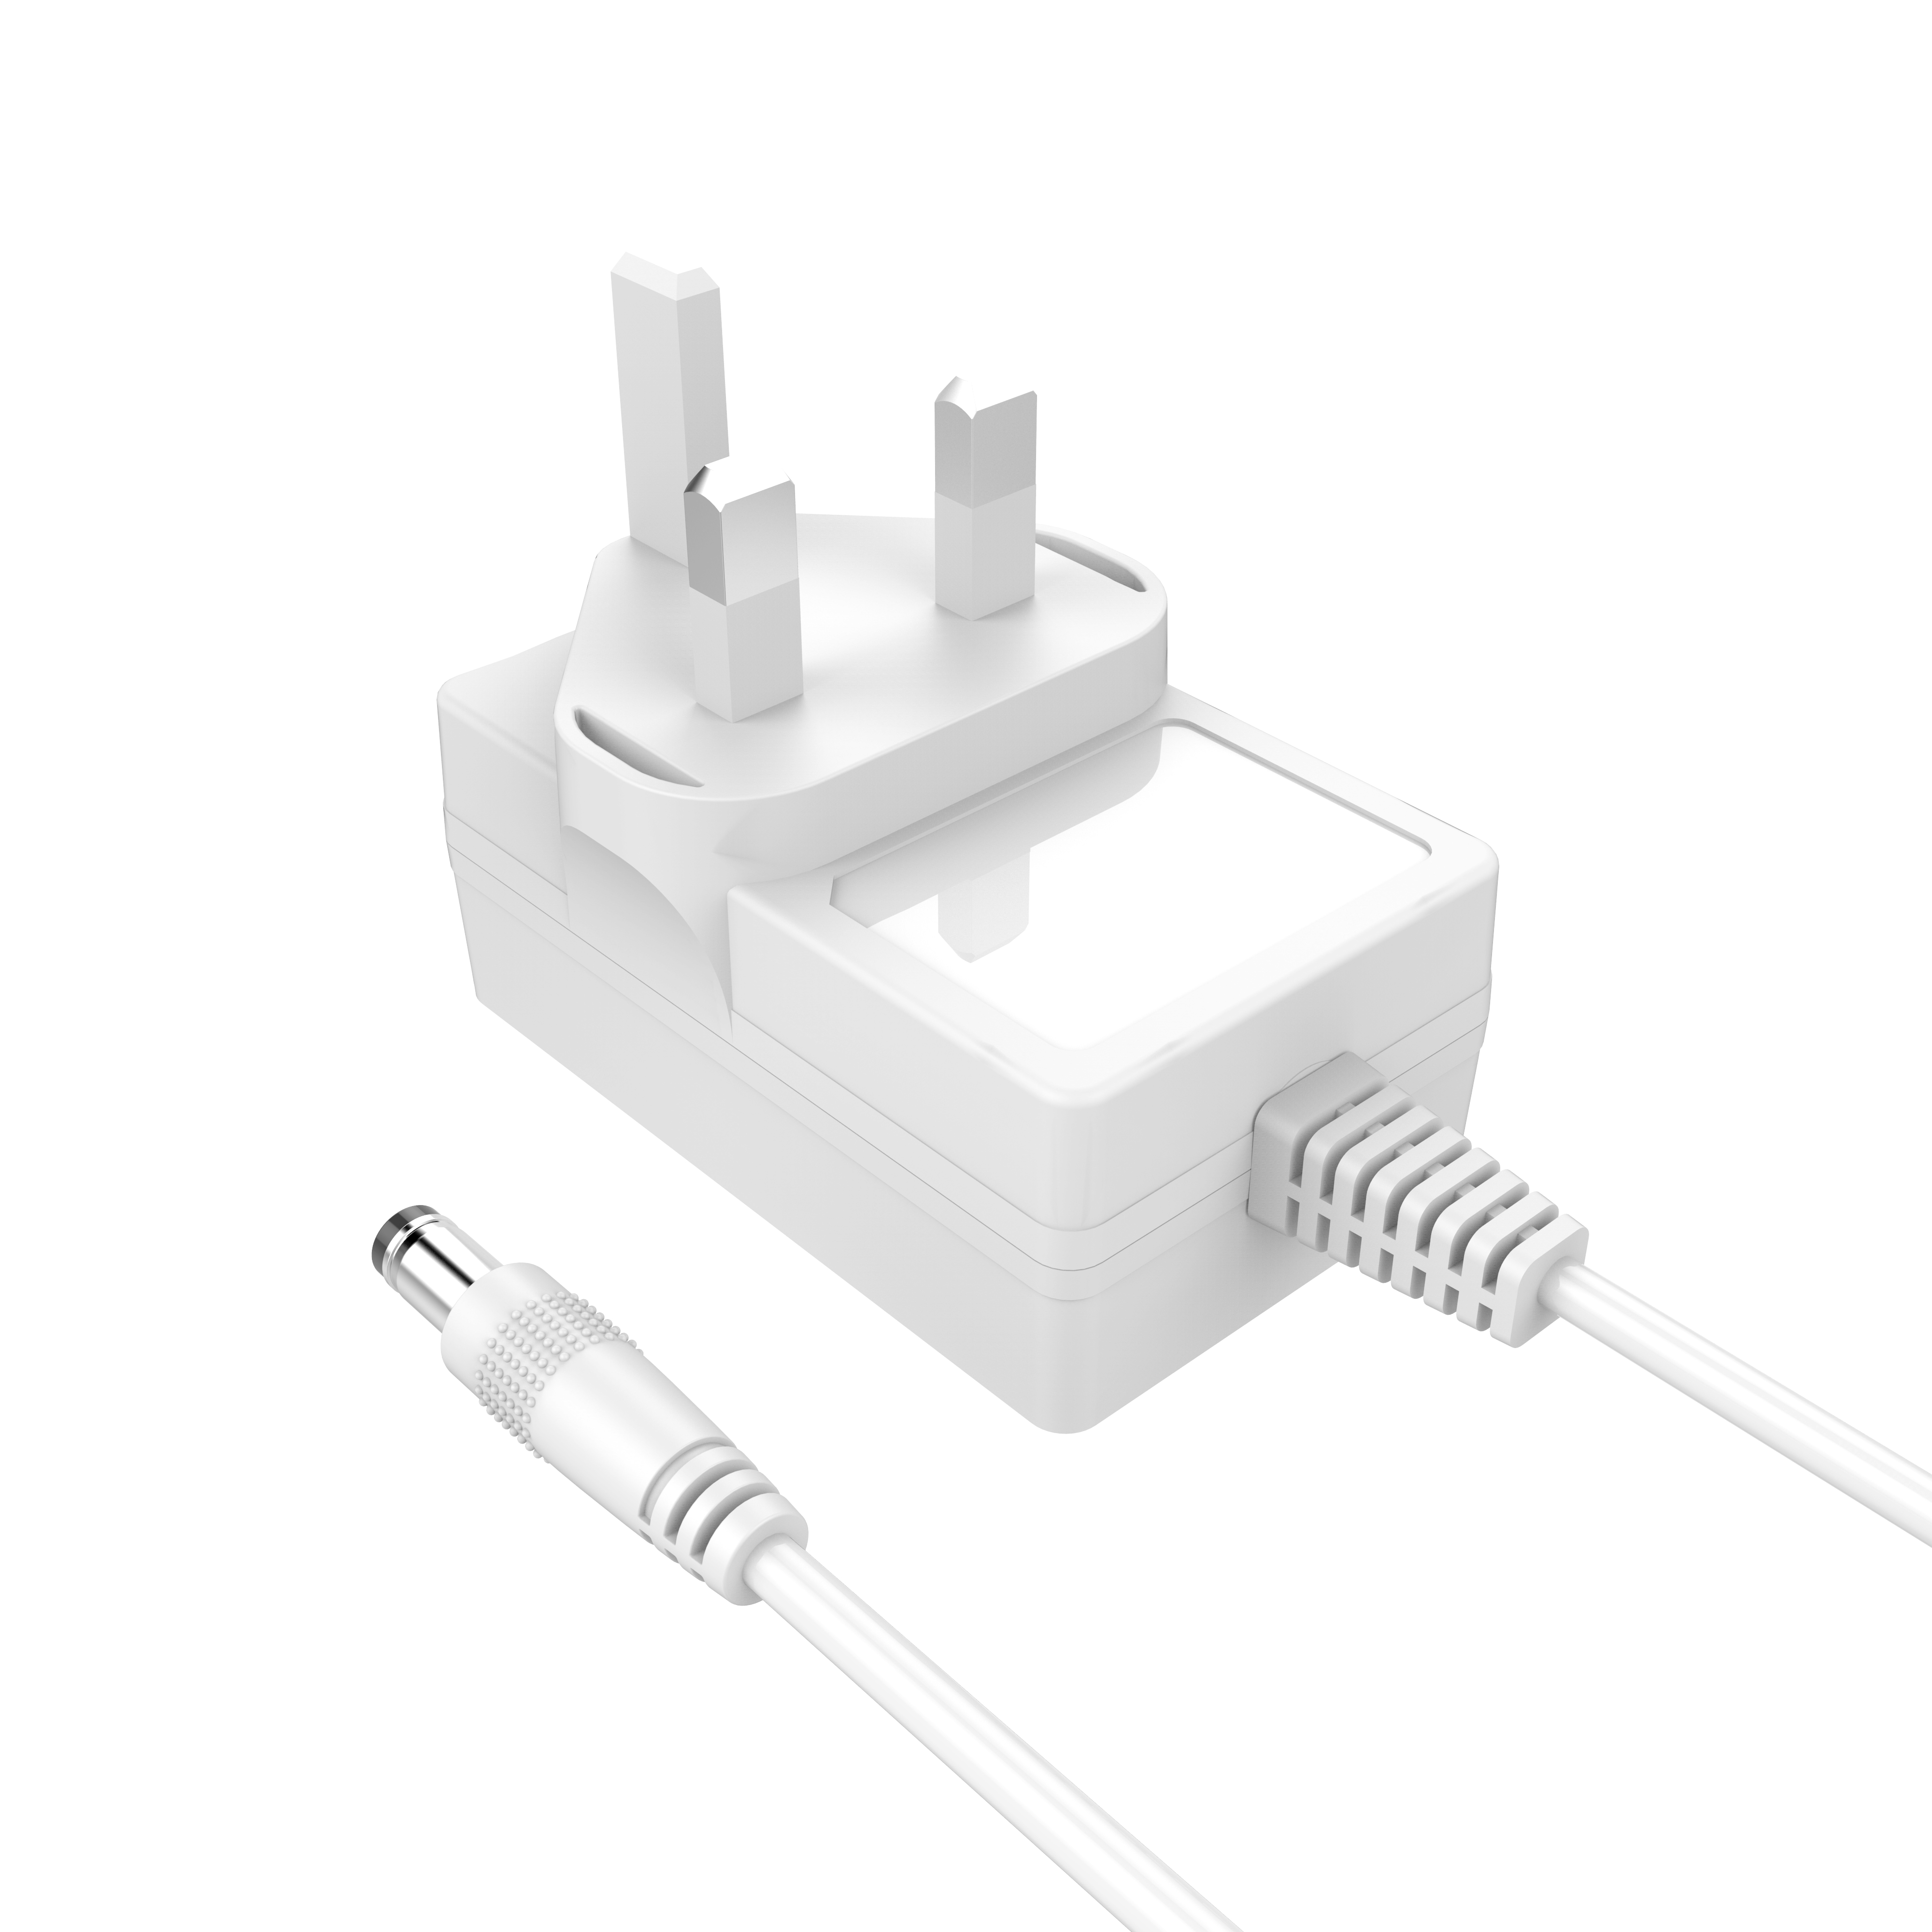 5v 9v 12v 24v wall mount uk plug adapter 1a 1.25a 2.5a 3a 3.5a adapter with CE GS EMC LVD certs for personal care product